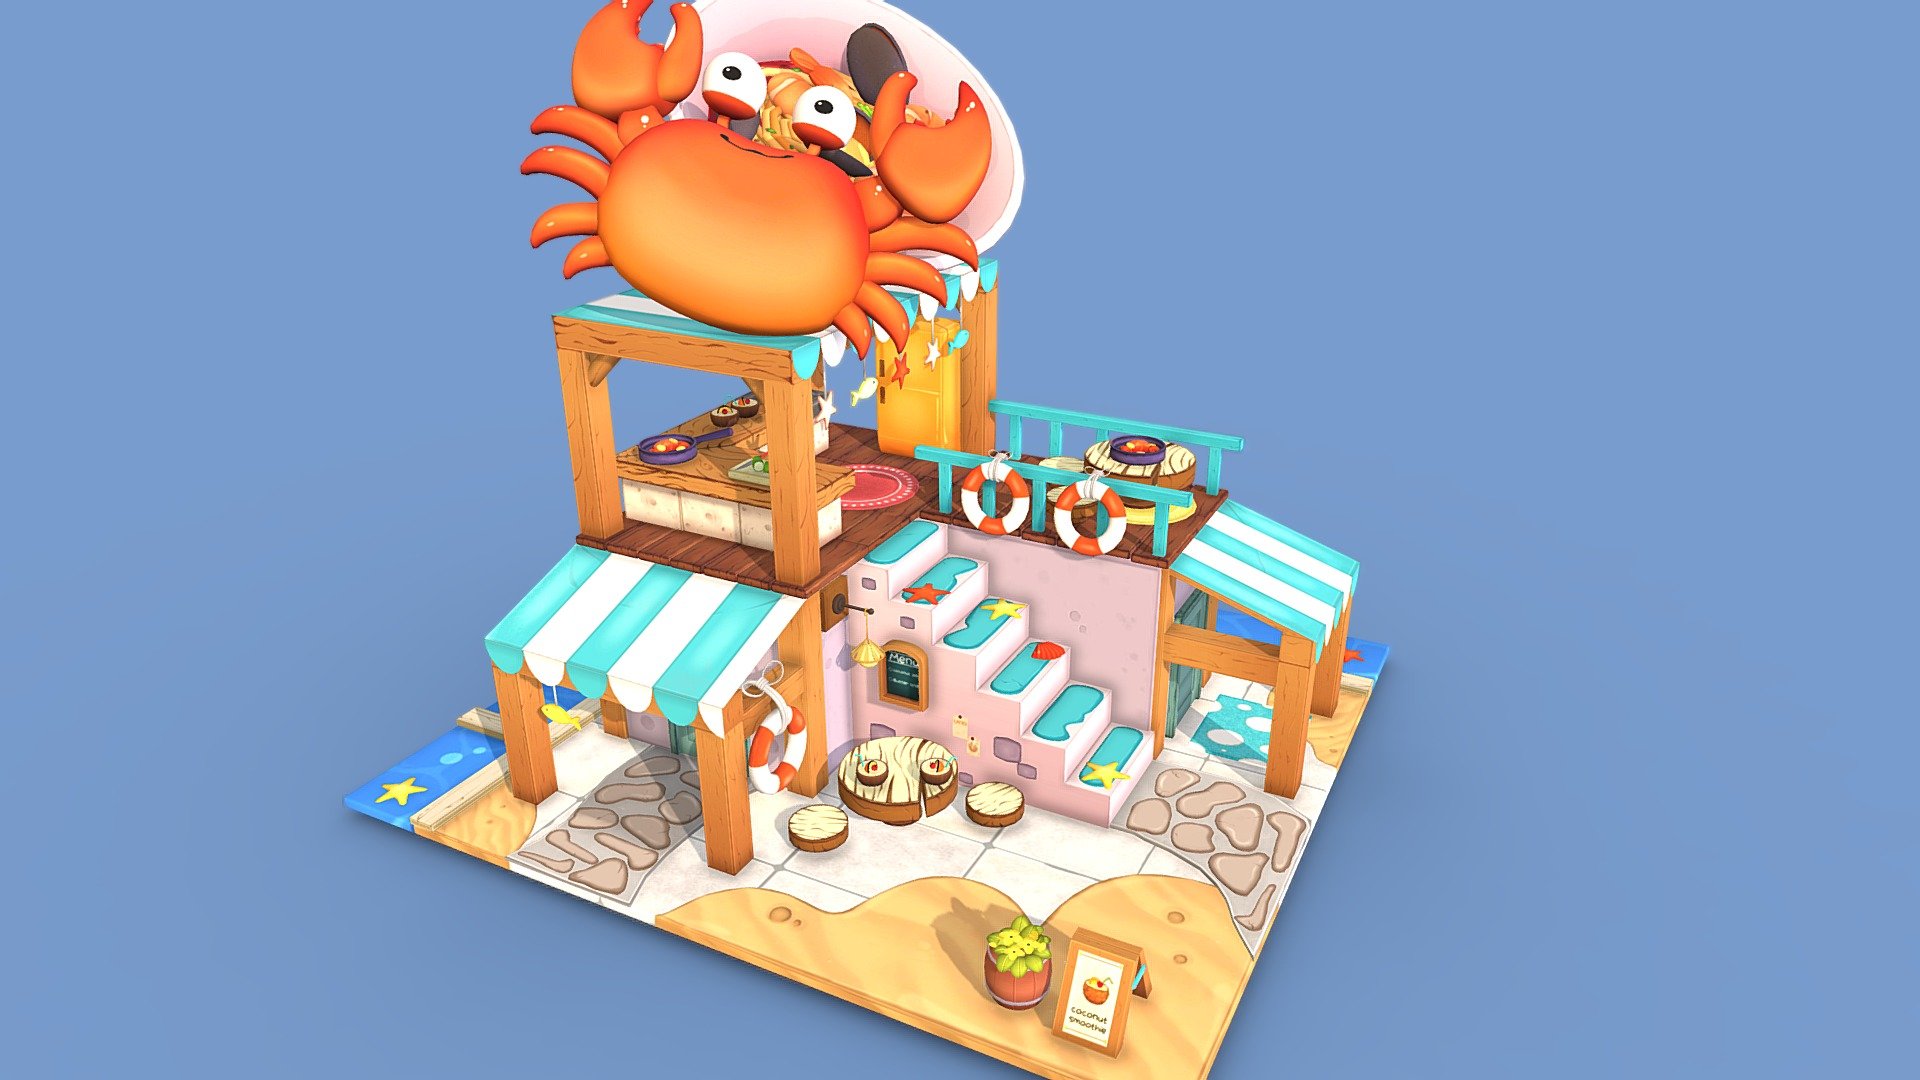 A cute stylized seafood restaurant diorama made in Maya 2024 and fully handpainted in Krita.
I hope you liked it and please give me feedbacks wherever necessary! Have a nice day!

Model inspiration is based on the concept art from the talented Soyun Lee 이소연 
https://soyunlee.artstation.com/projects/48Nkdk - Seafood Restaurant | 3D stylized diorama - 3D model by Ash (@Jasmine.Ashley) 3d model